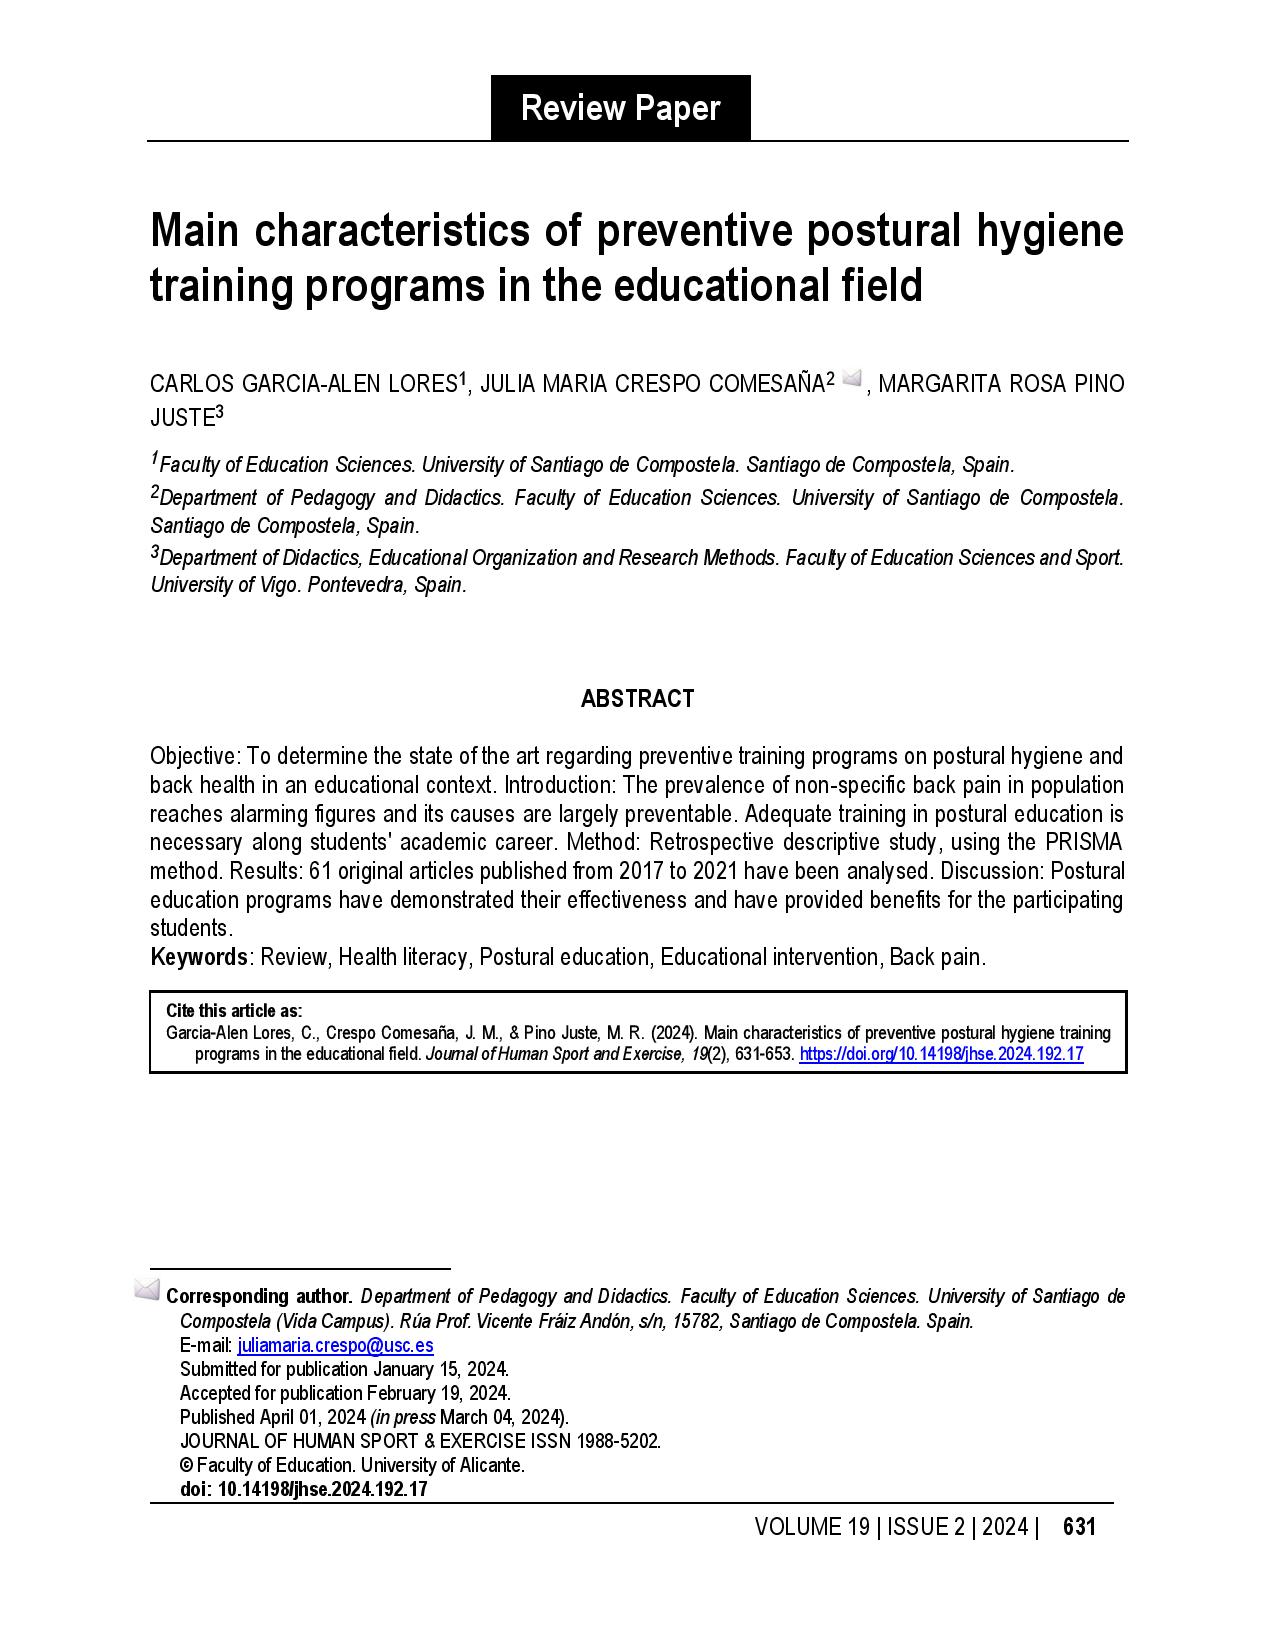 Main characteristics of preventive postural hygiene training programs in the educational field